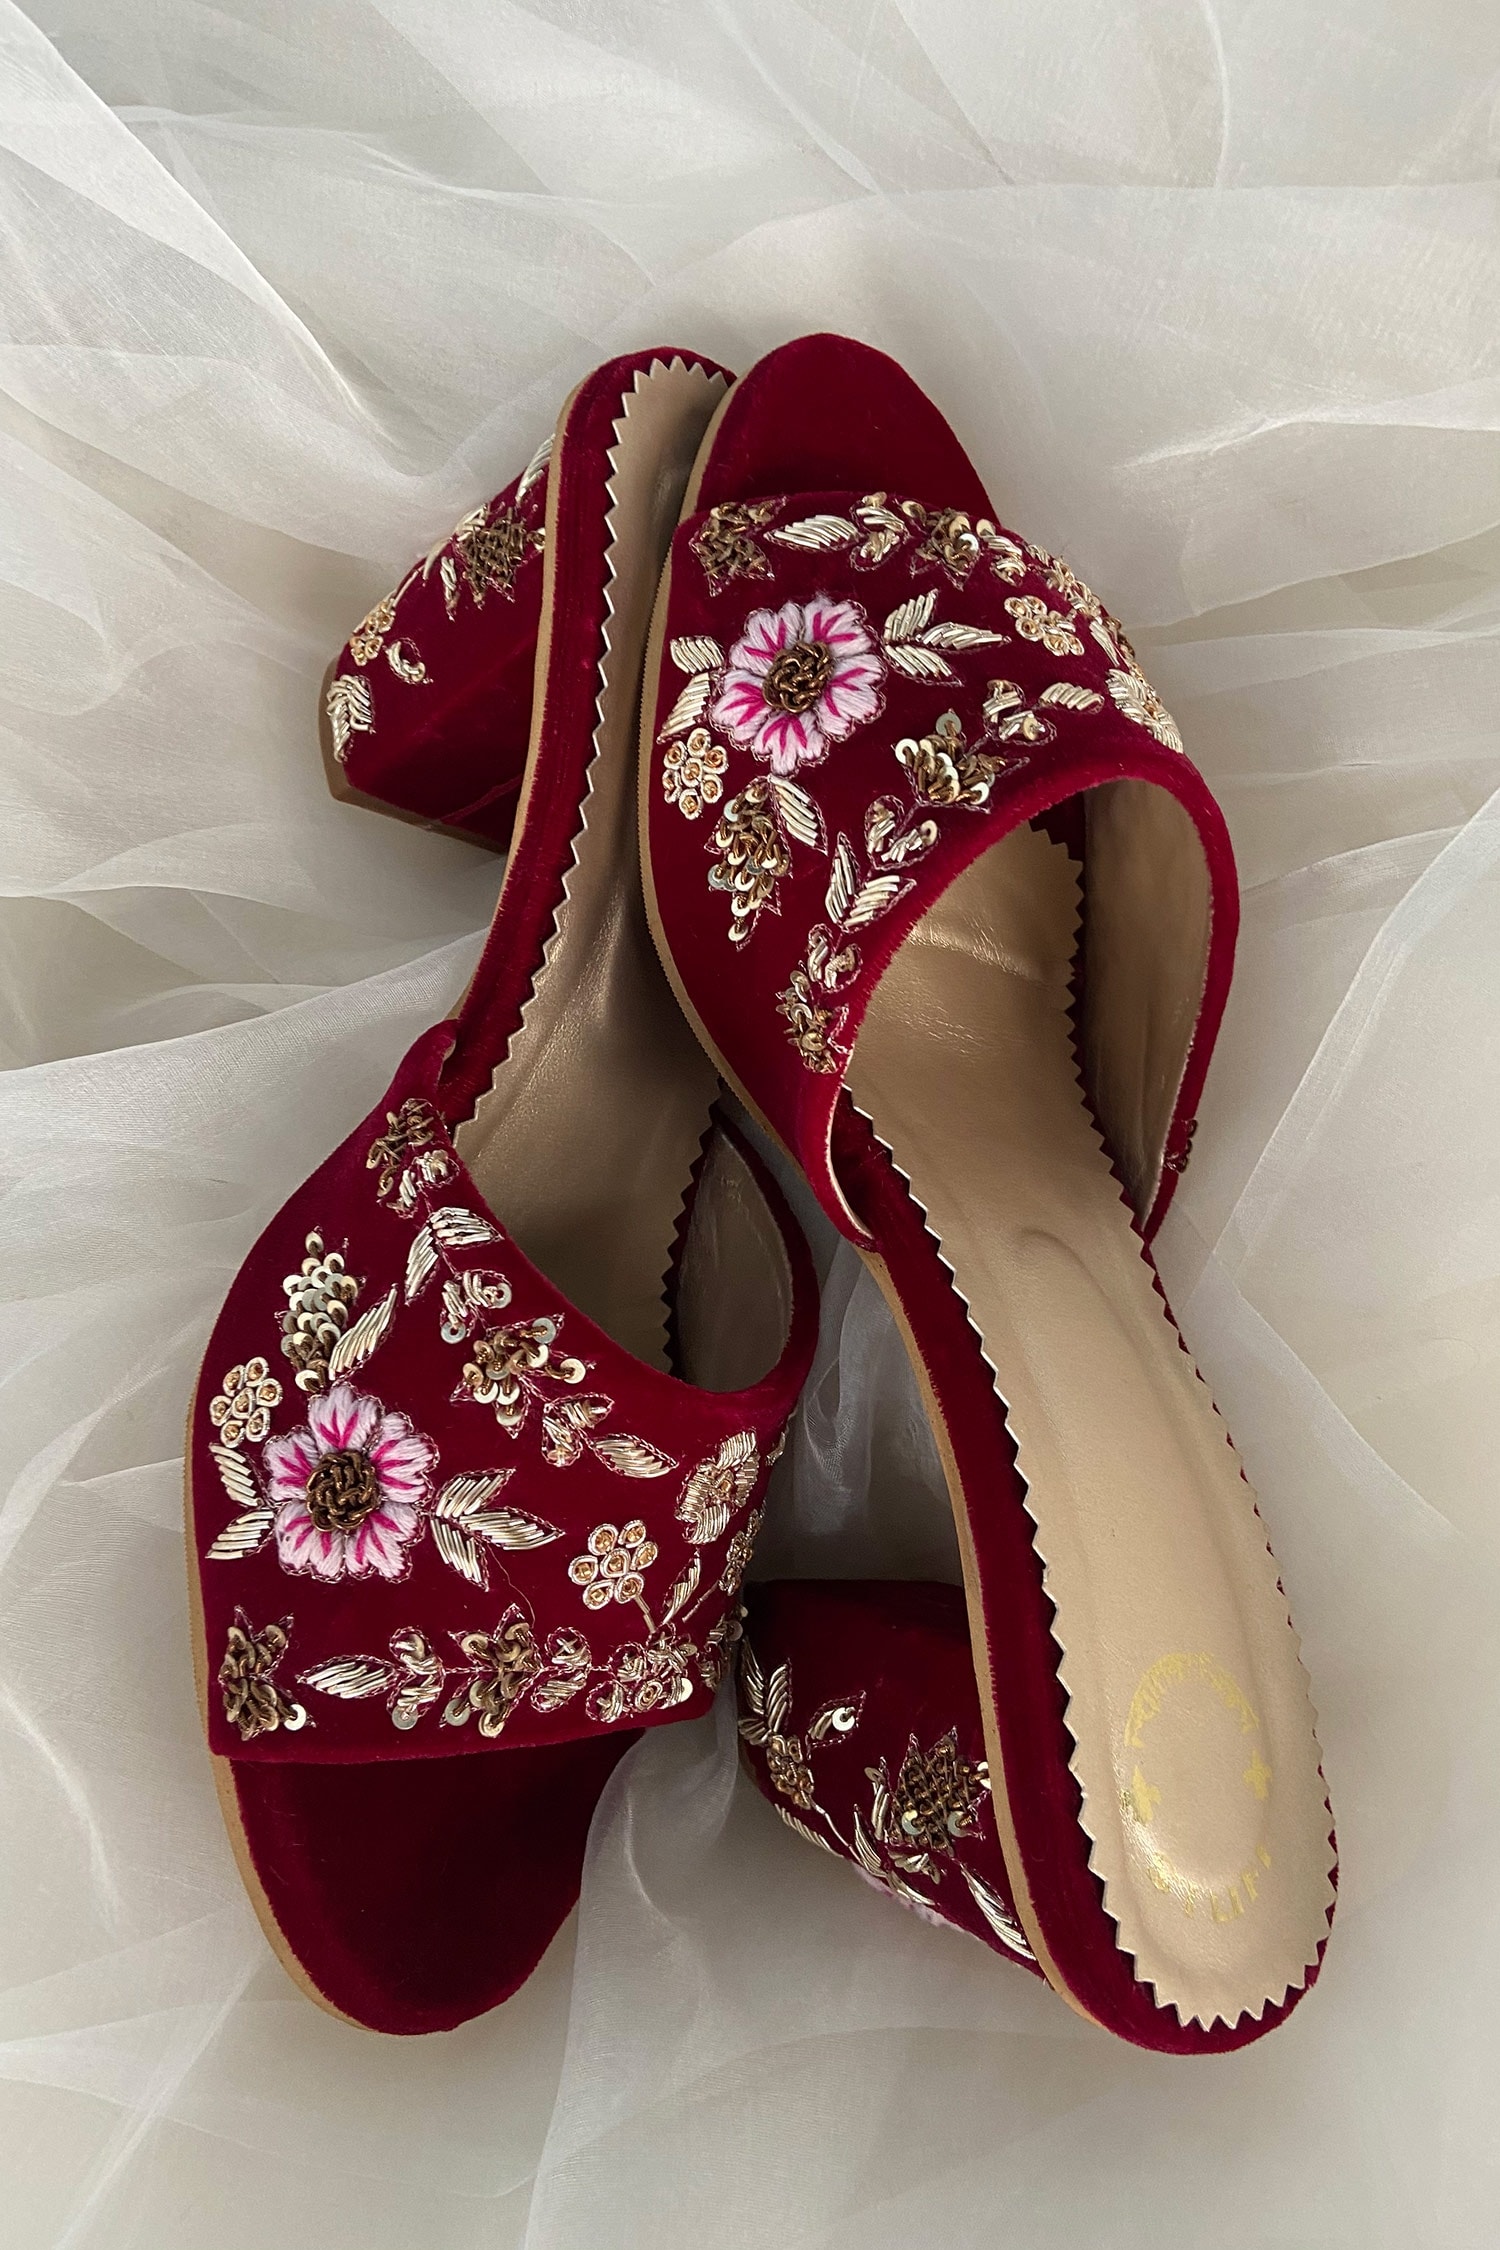 Burgundy Shoes For Women, Wedding Shoes, Bridesmaids Shoes, Prom Shoes